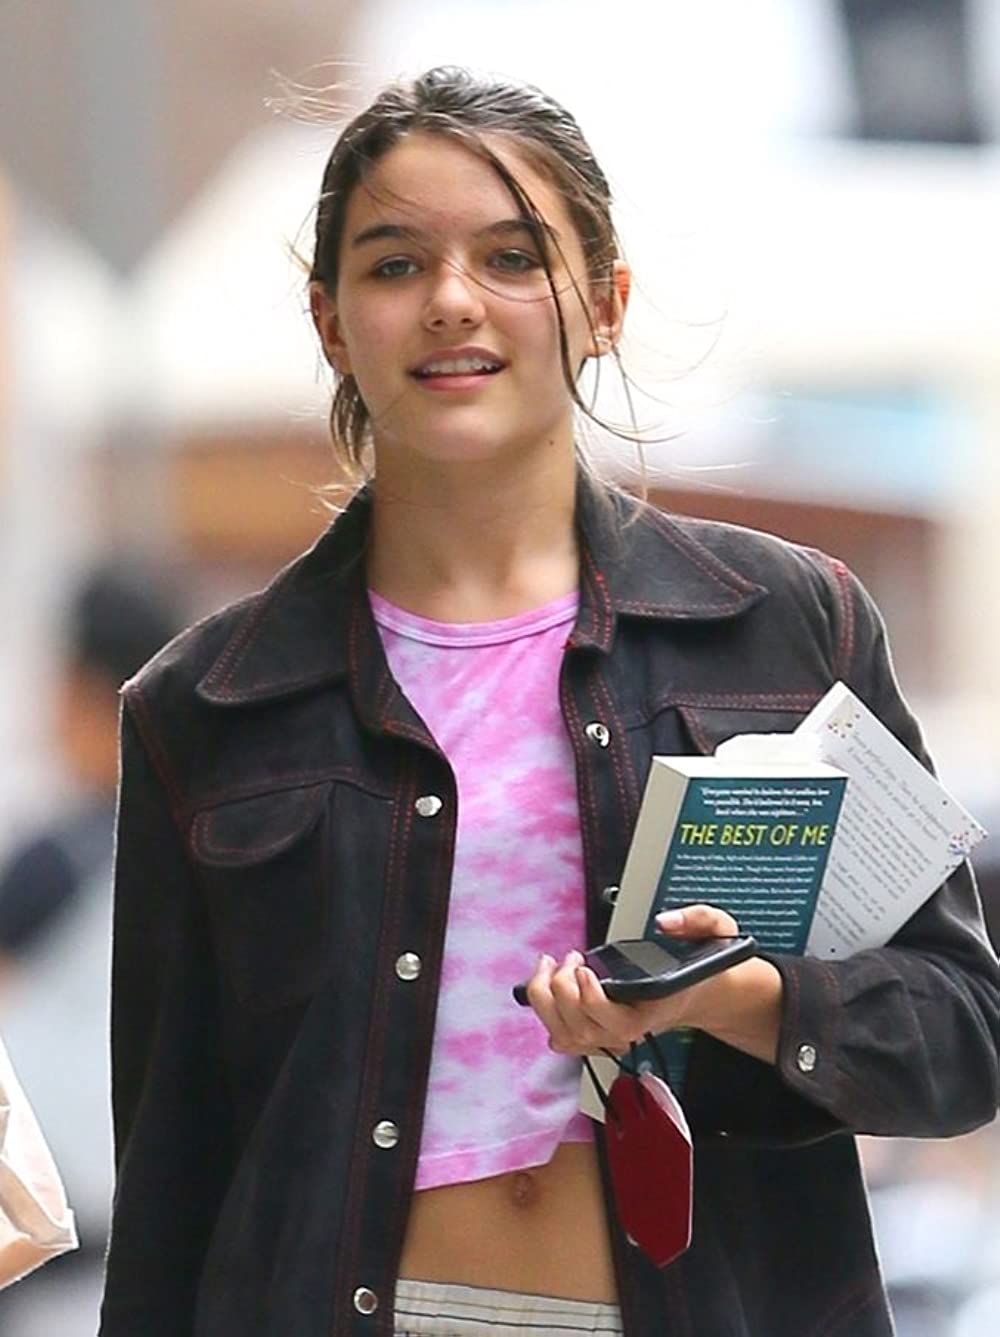 Suri at age 17 Haven't seen Tom Cruise in more than 10 years